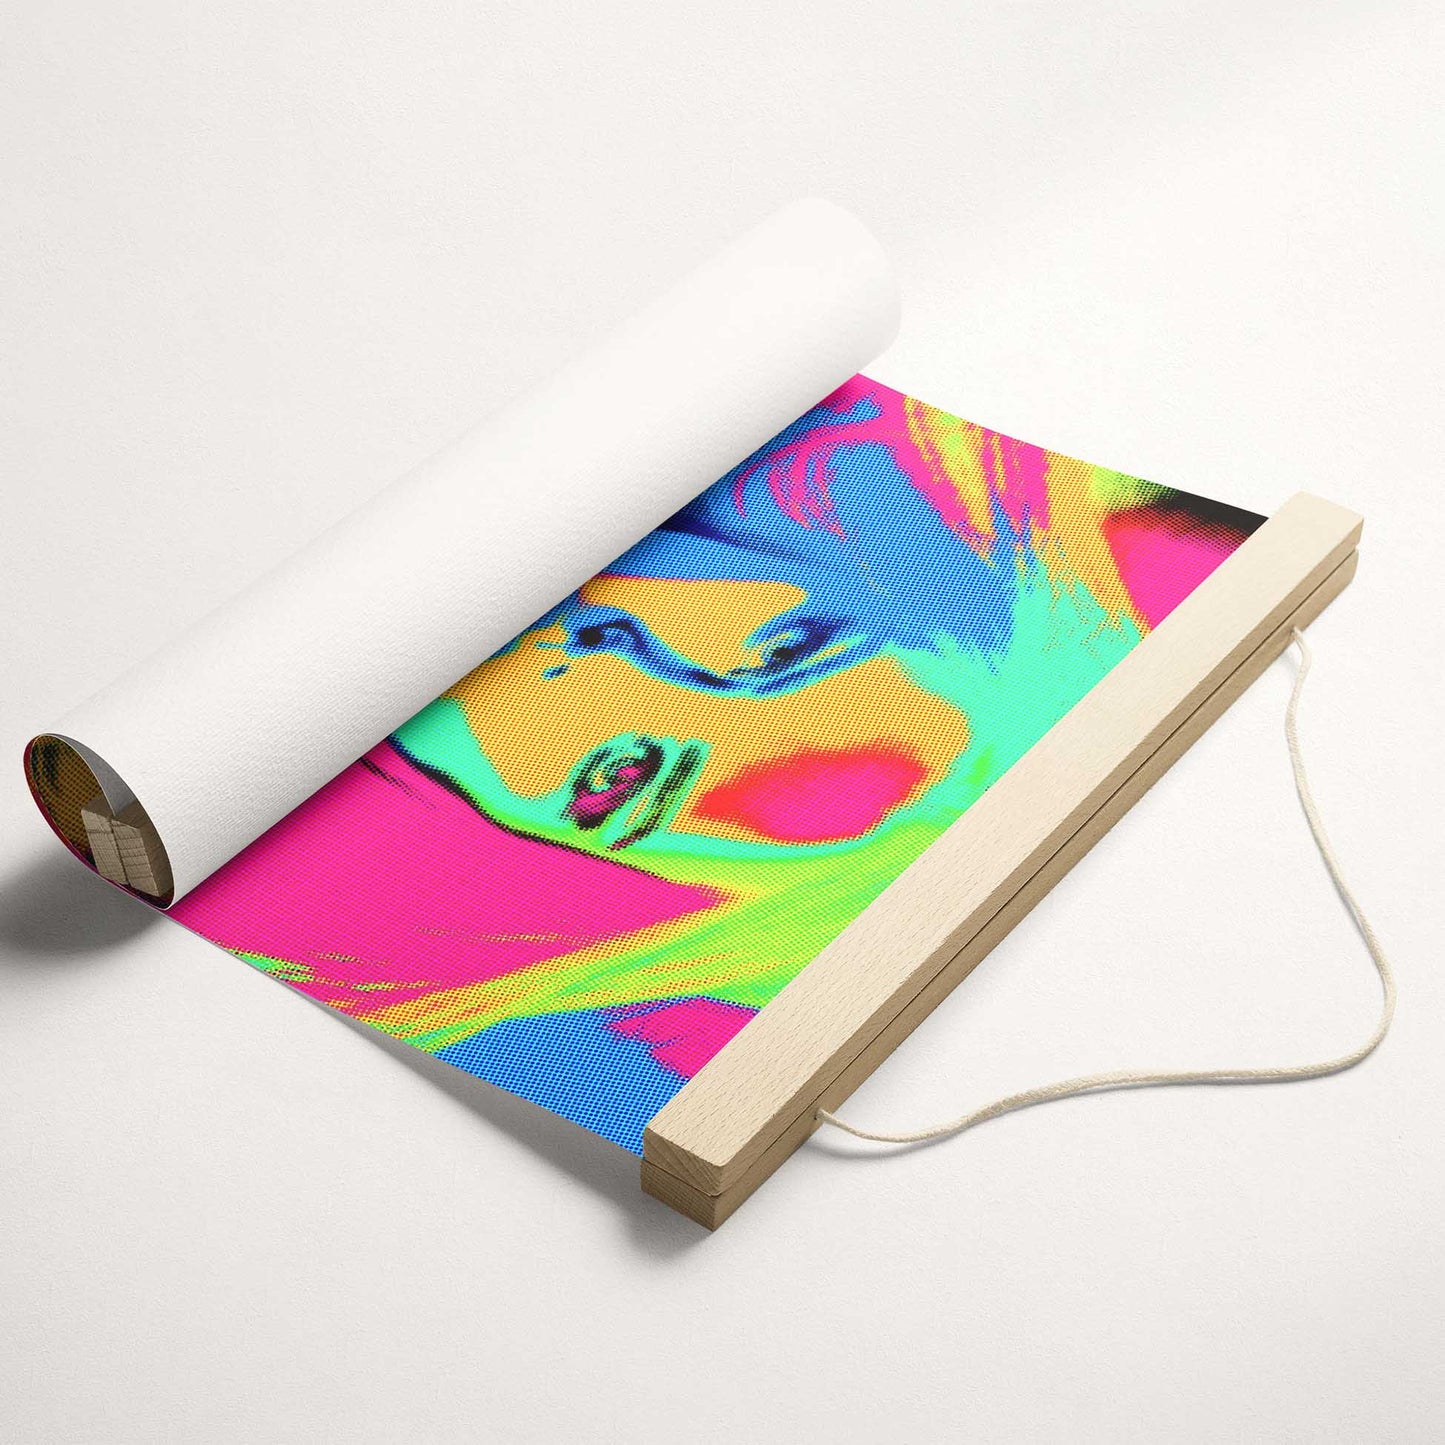 The Personalised Graffiti Street Art Poster Hanger is a celebration of creativity and self-expression. With its cool graffiti style and street art filter, it adds a unique and vibrant touch to any wall